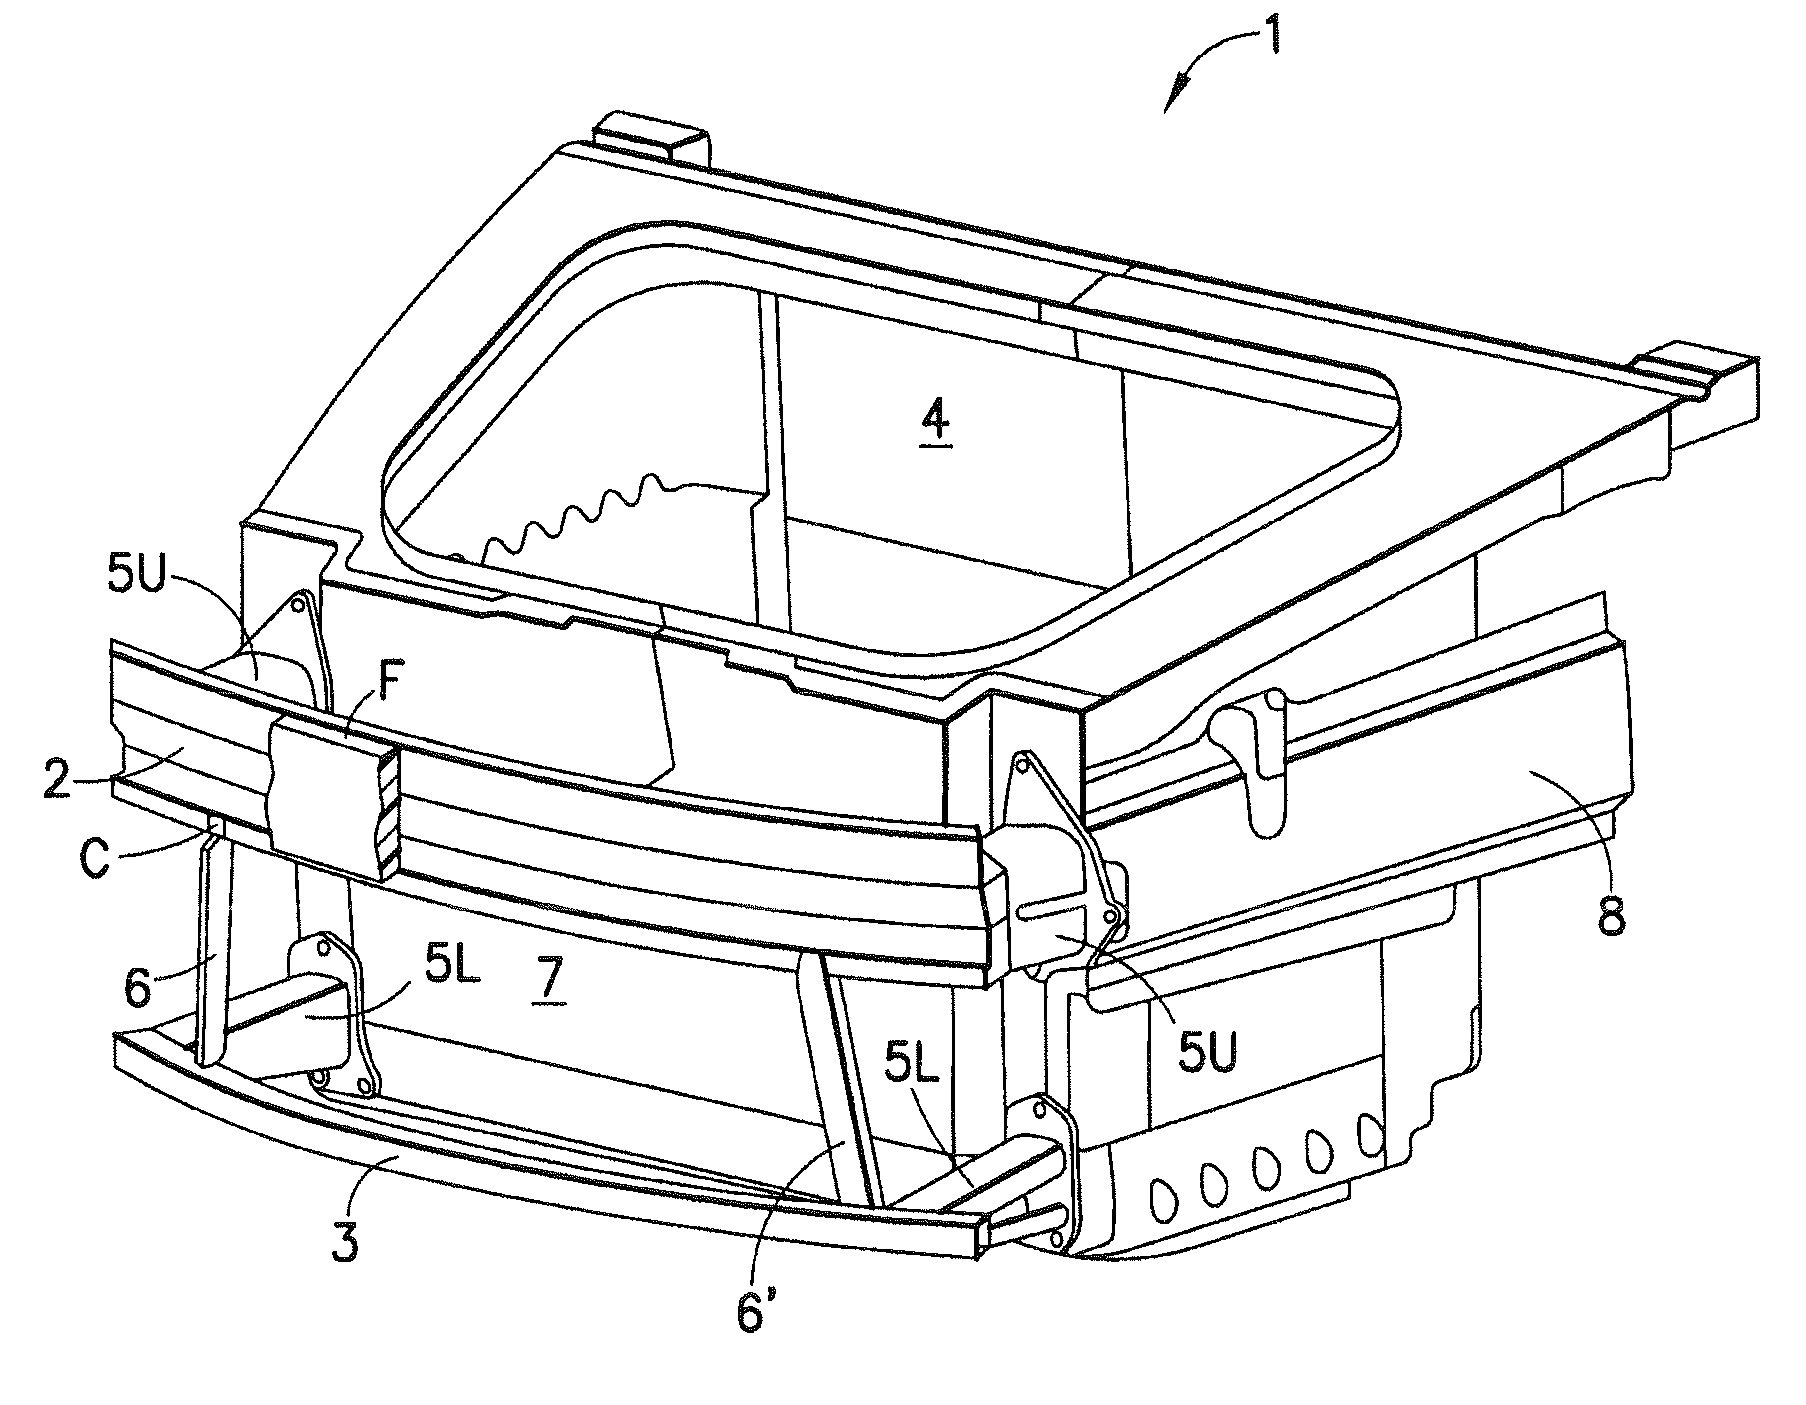 Front structure of a motor vehicle